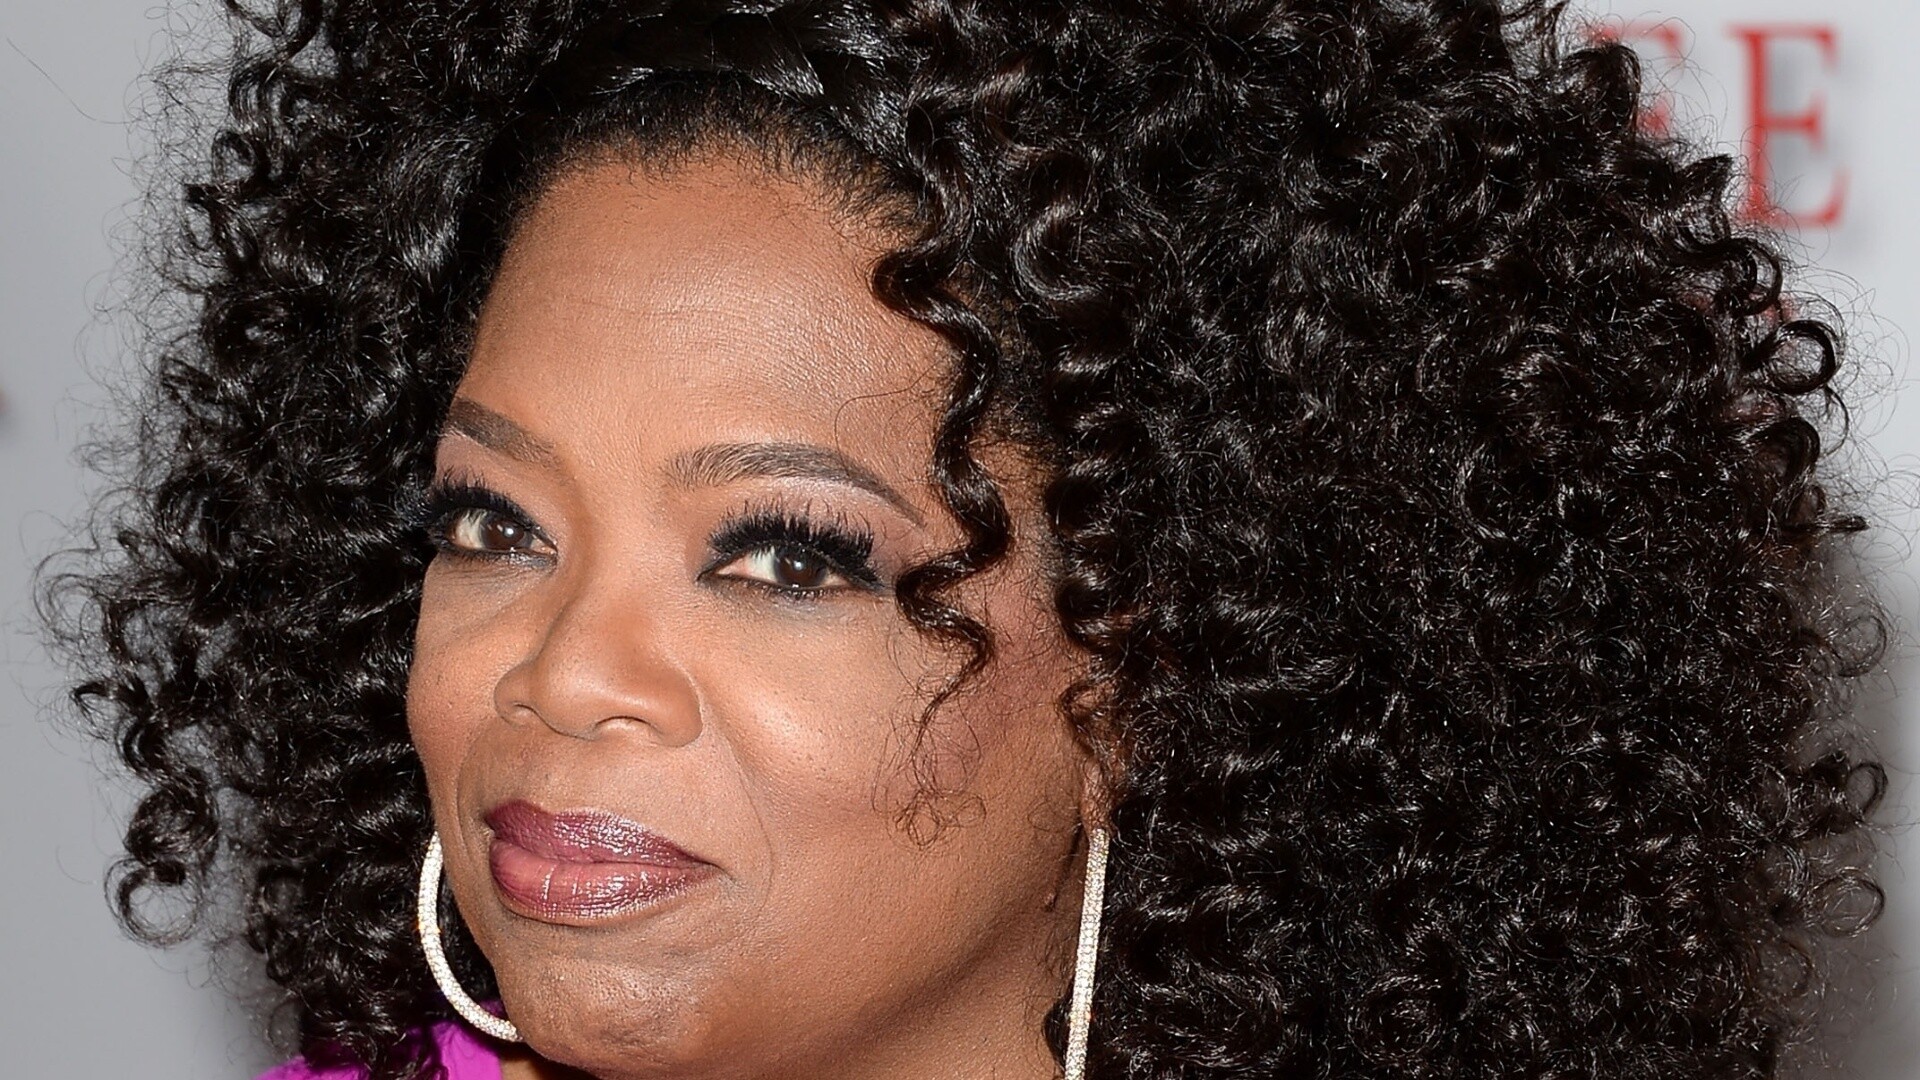 Oprah Winfrey: Elected as a member of the American Academy of Arts and Sciences, 2021. 1920x1080 Full HD Wallpaper.